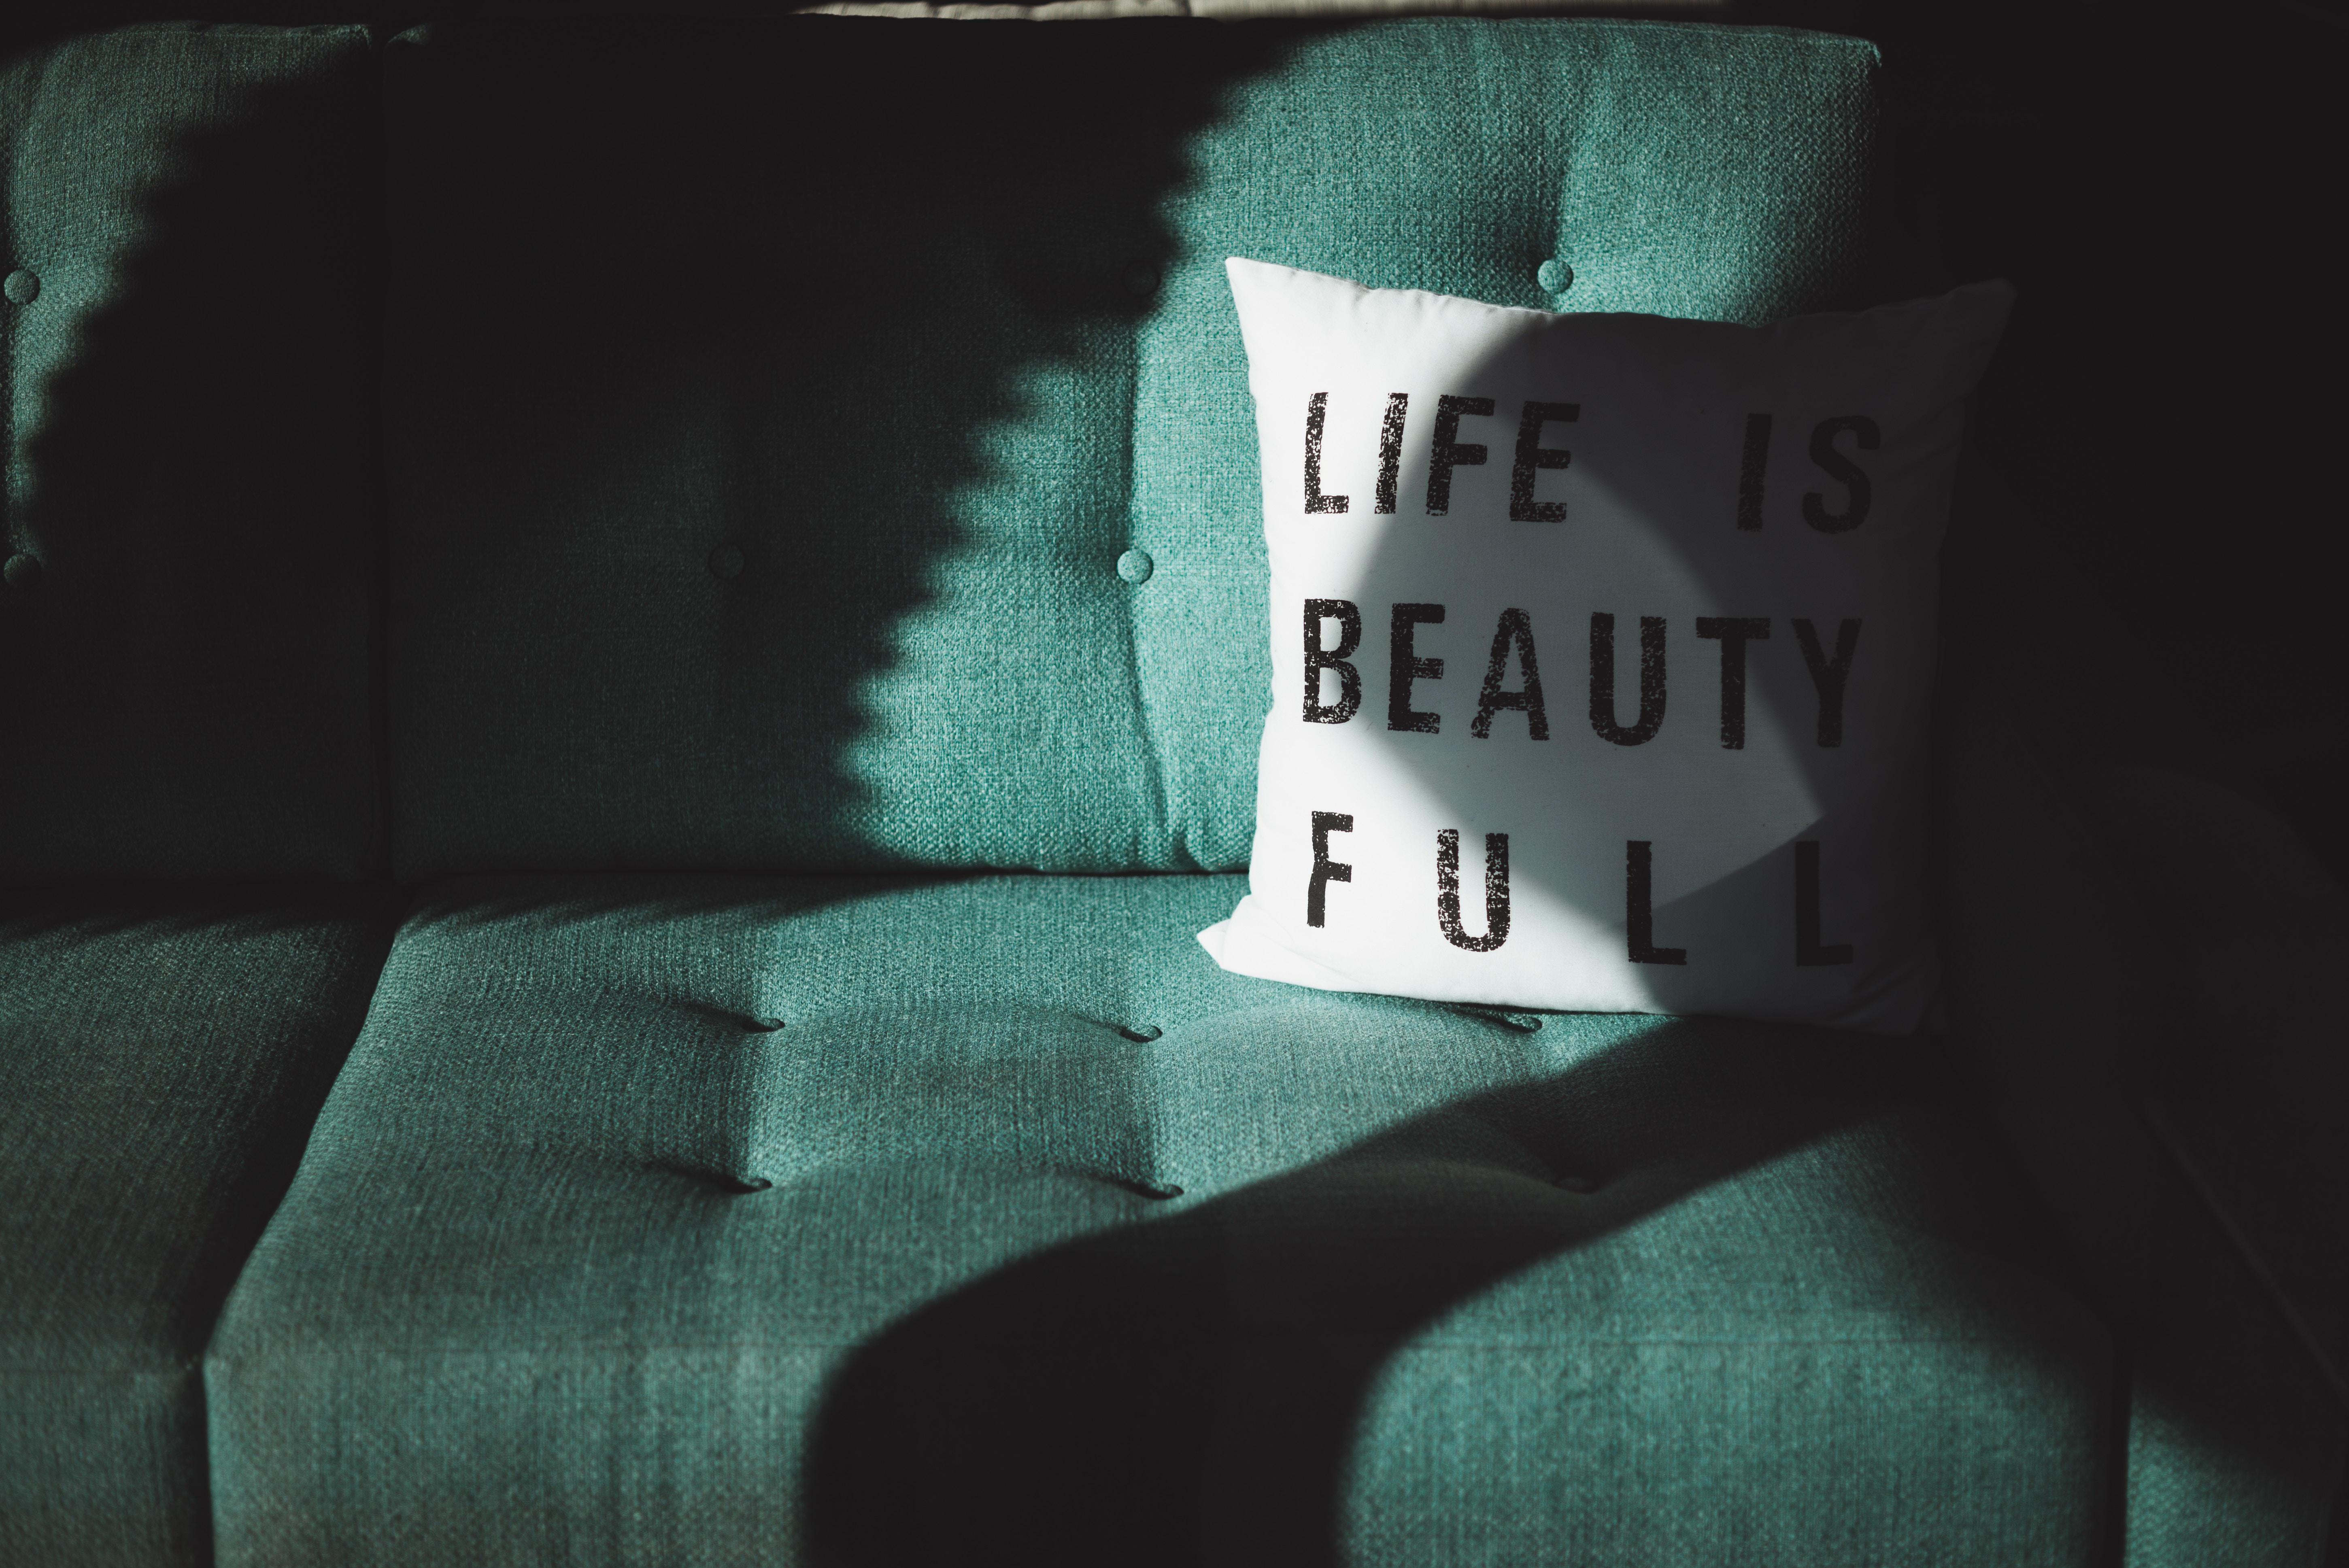 inscription, pillow, words, shadow HD Wallpaper for Phone